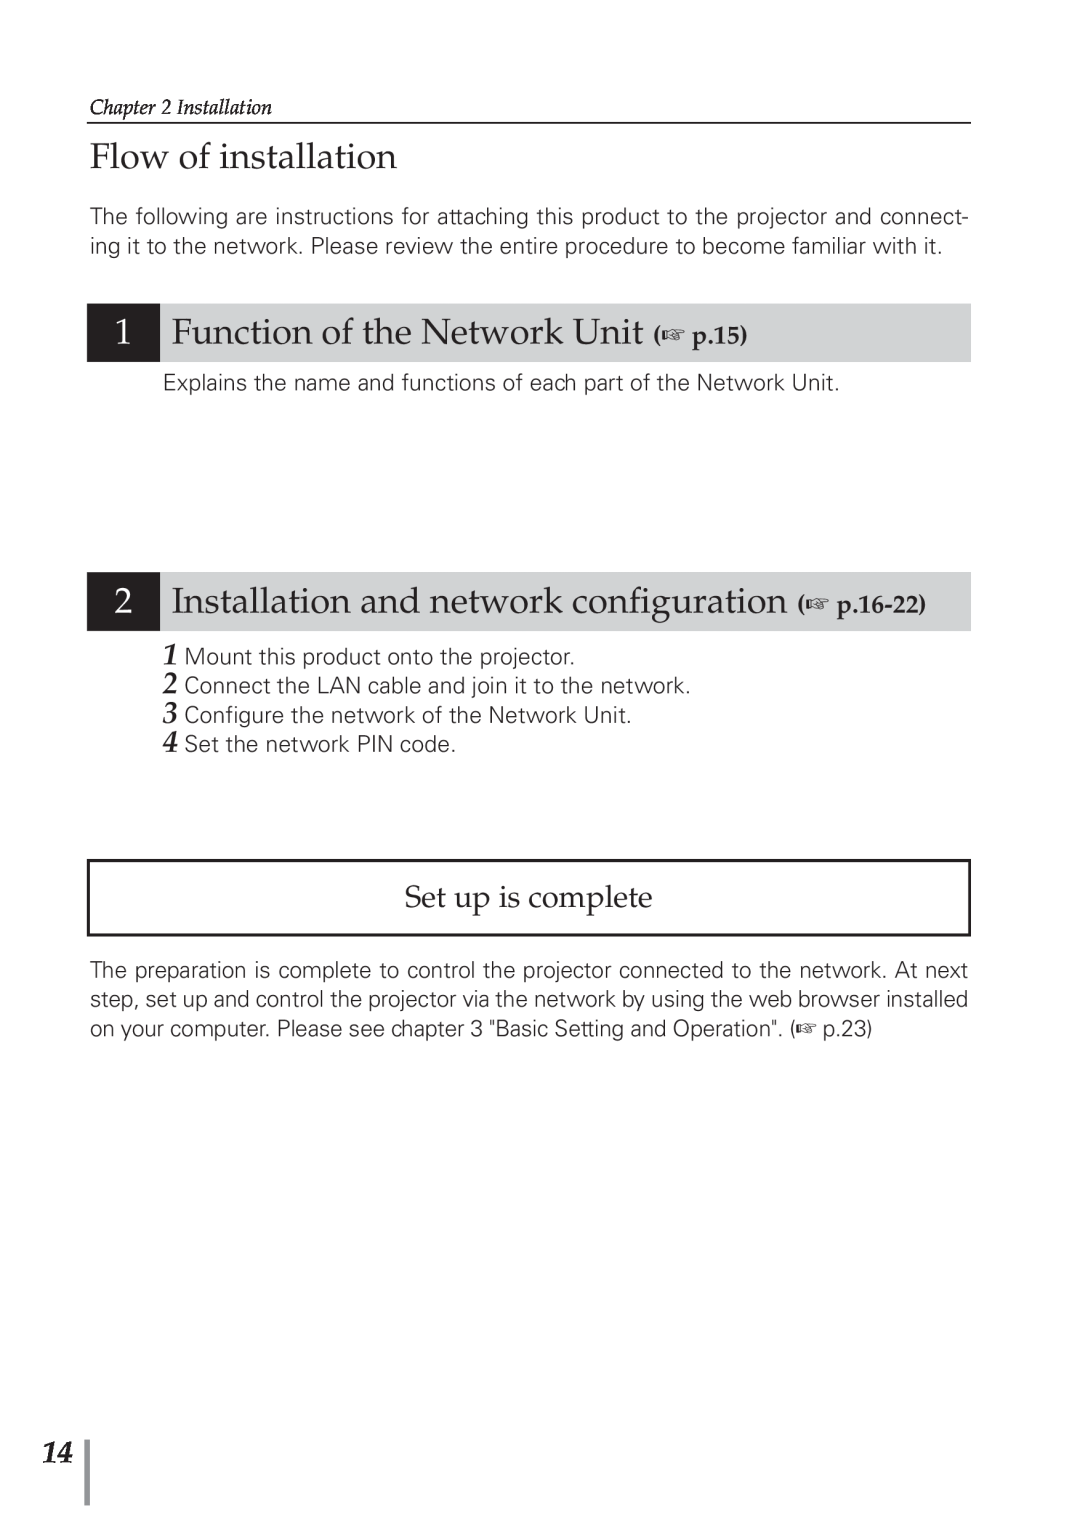 Eiki PJNET-300 Flow of installation, Function of the Network Unit p.15, Installation and network configuration p.16-22 